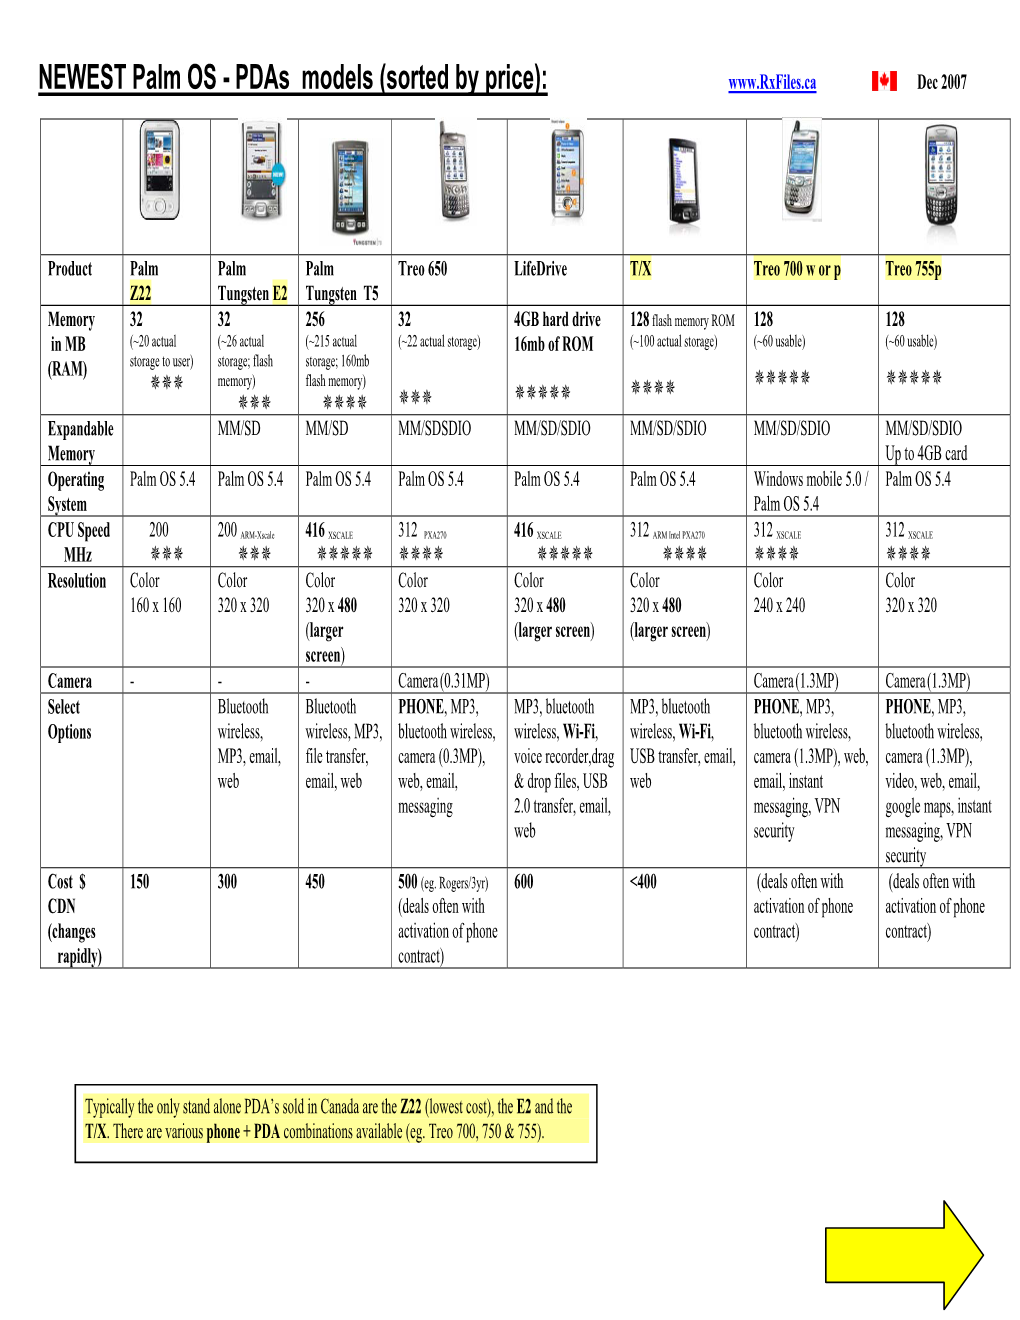 NEWEST Palm OS - Pdas Models (Sorted by Price): Dec 2007